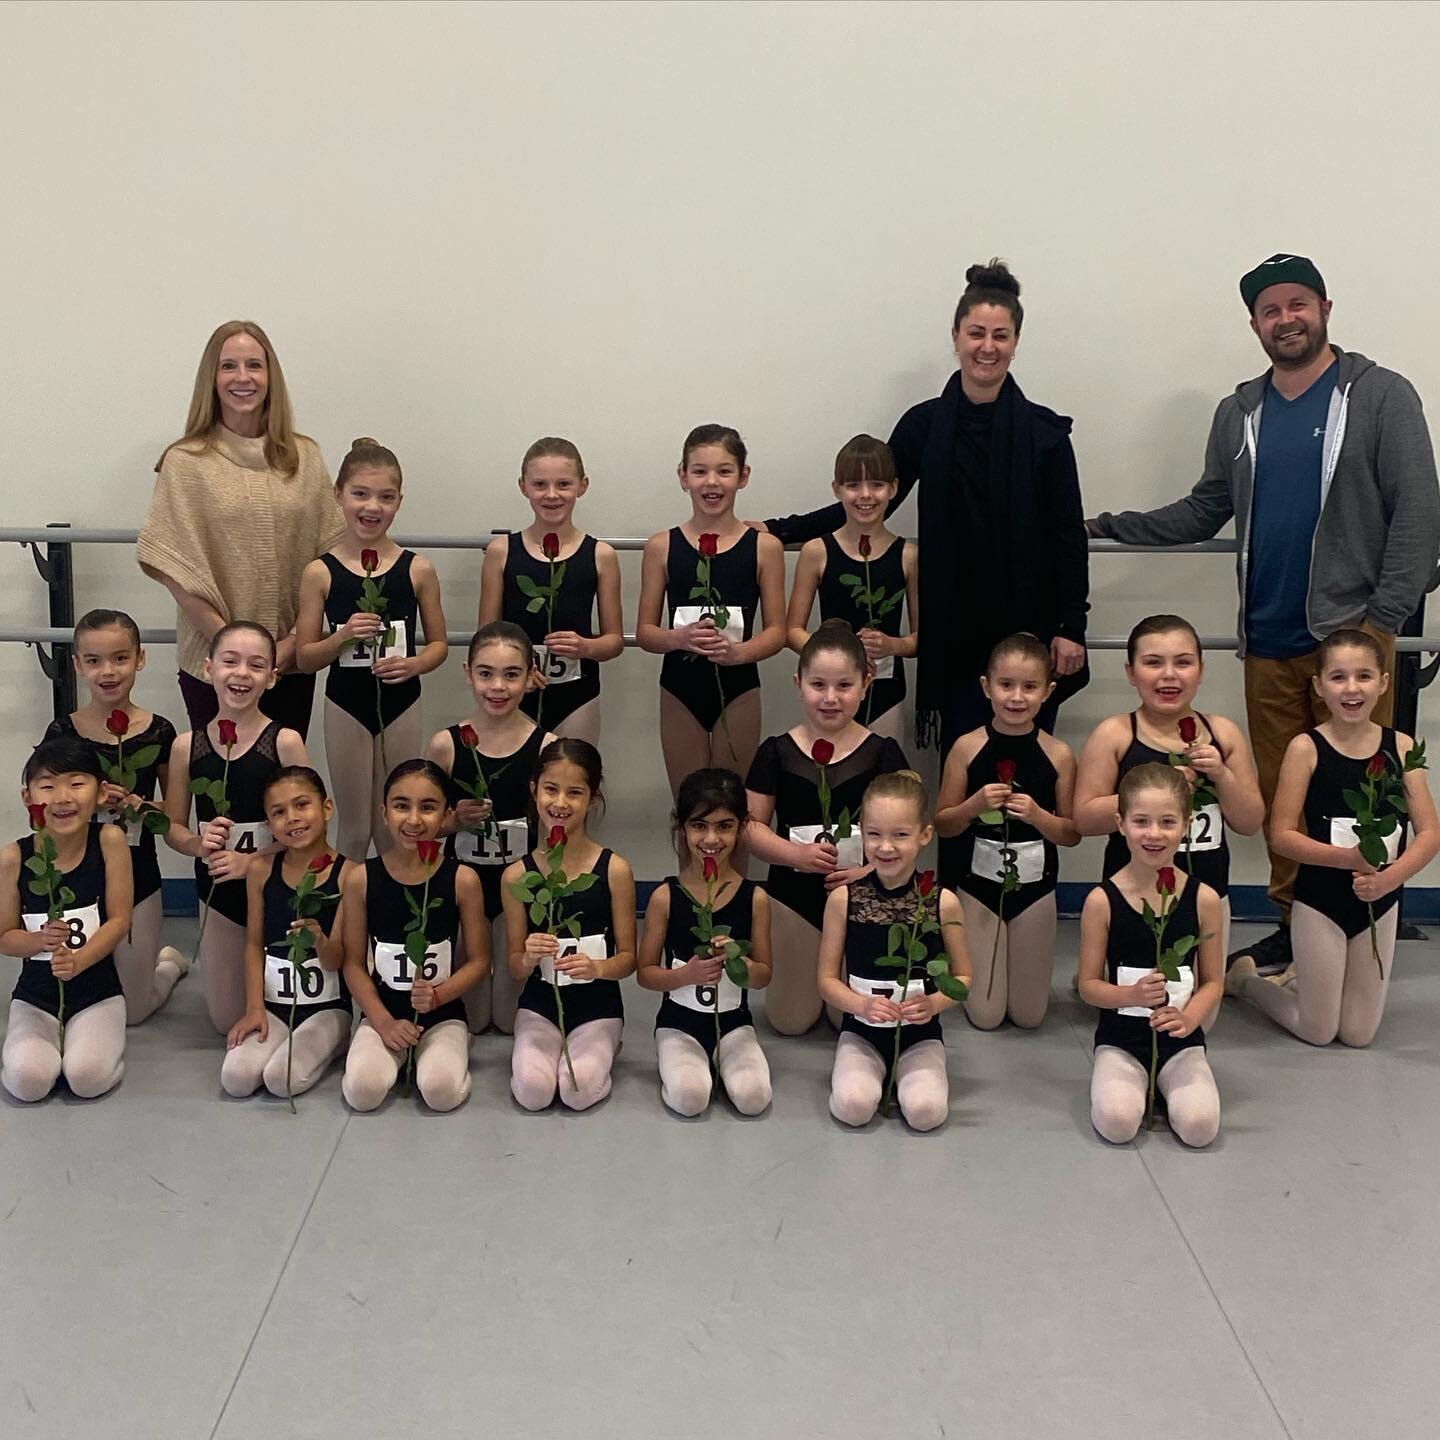 Huge congratulations to our Invitational Ballet dancers for your impressive dedication and focus that we witnessed over the past two days. We are so proud of each and every student&rsquo;s tremendous growth in their class work.

A big thank you to Ms